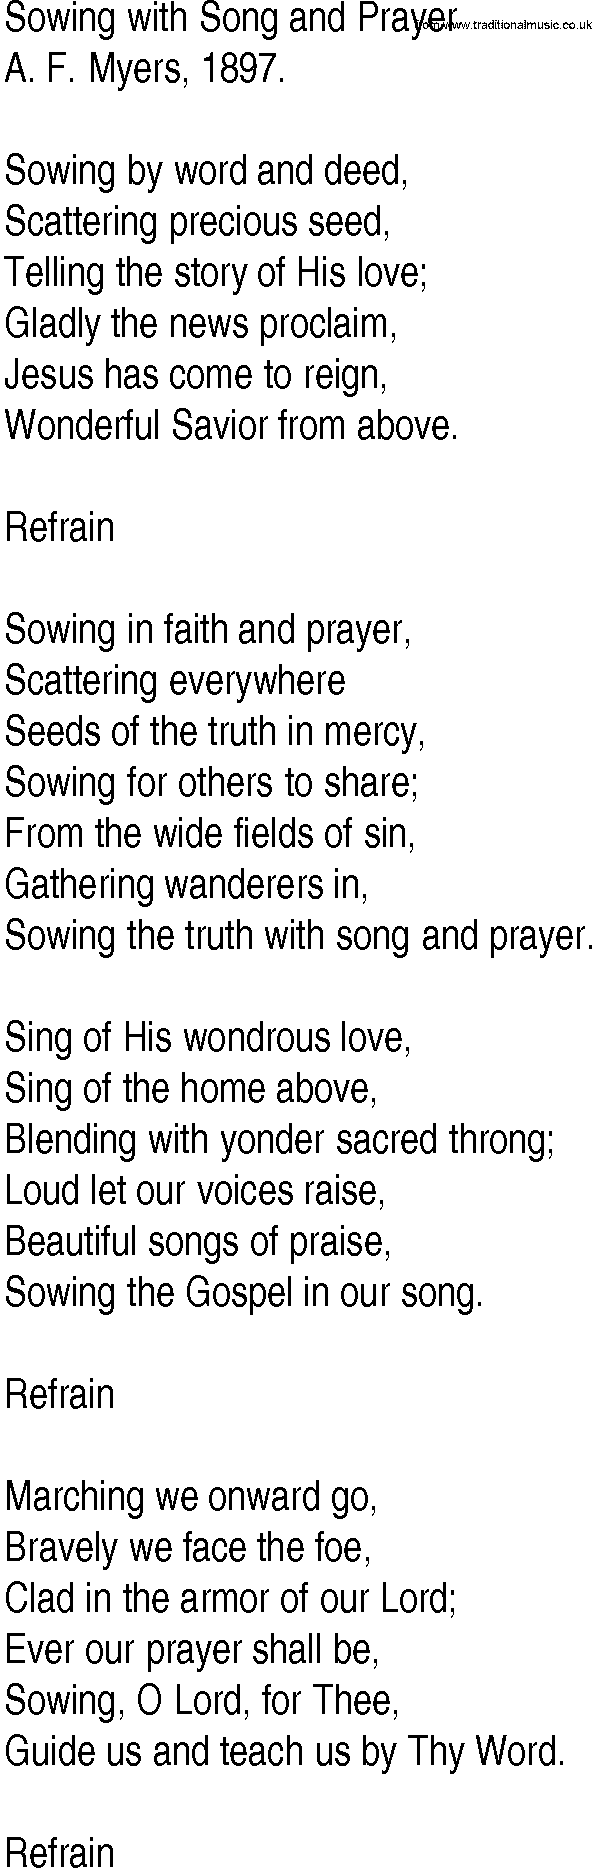 Hymn and Gospel Song: Sowing with Song and Prayer by A F Myers lyrics